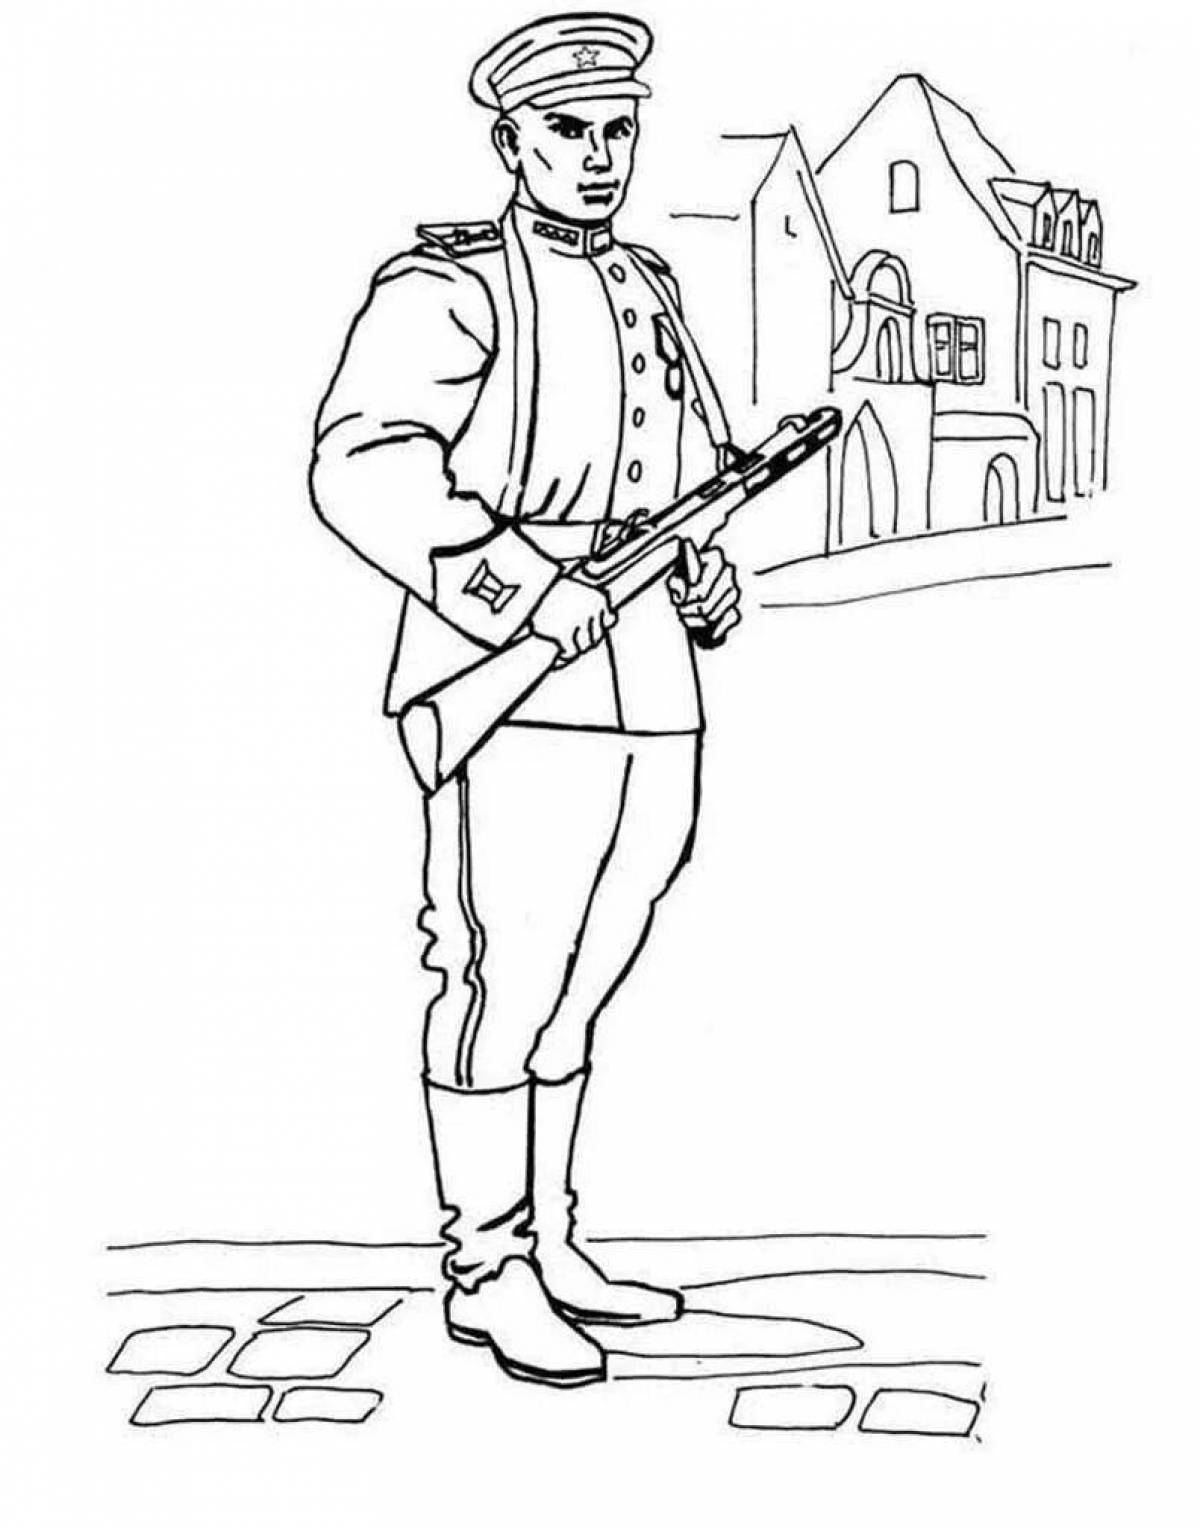 Exciting officer coloring page